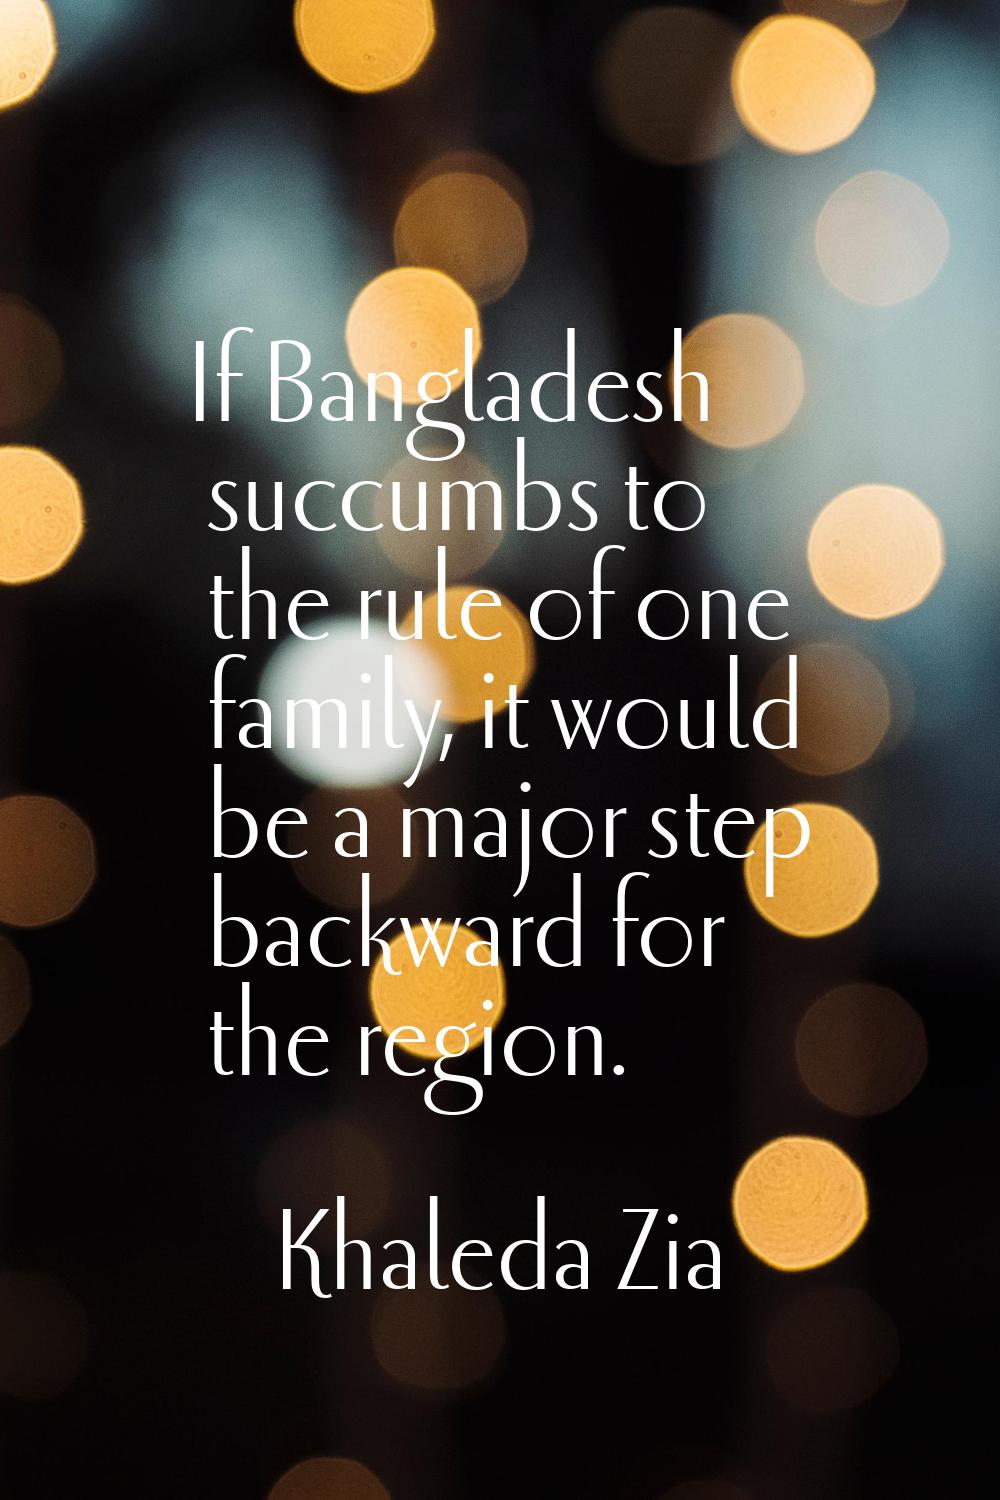 If Bangladesh succumbs to the rule of one family, it would be a major step backward for the region.